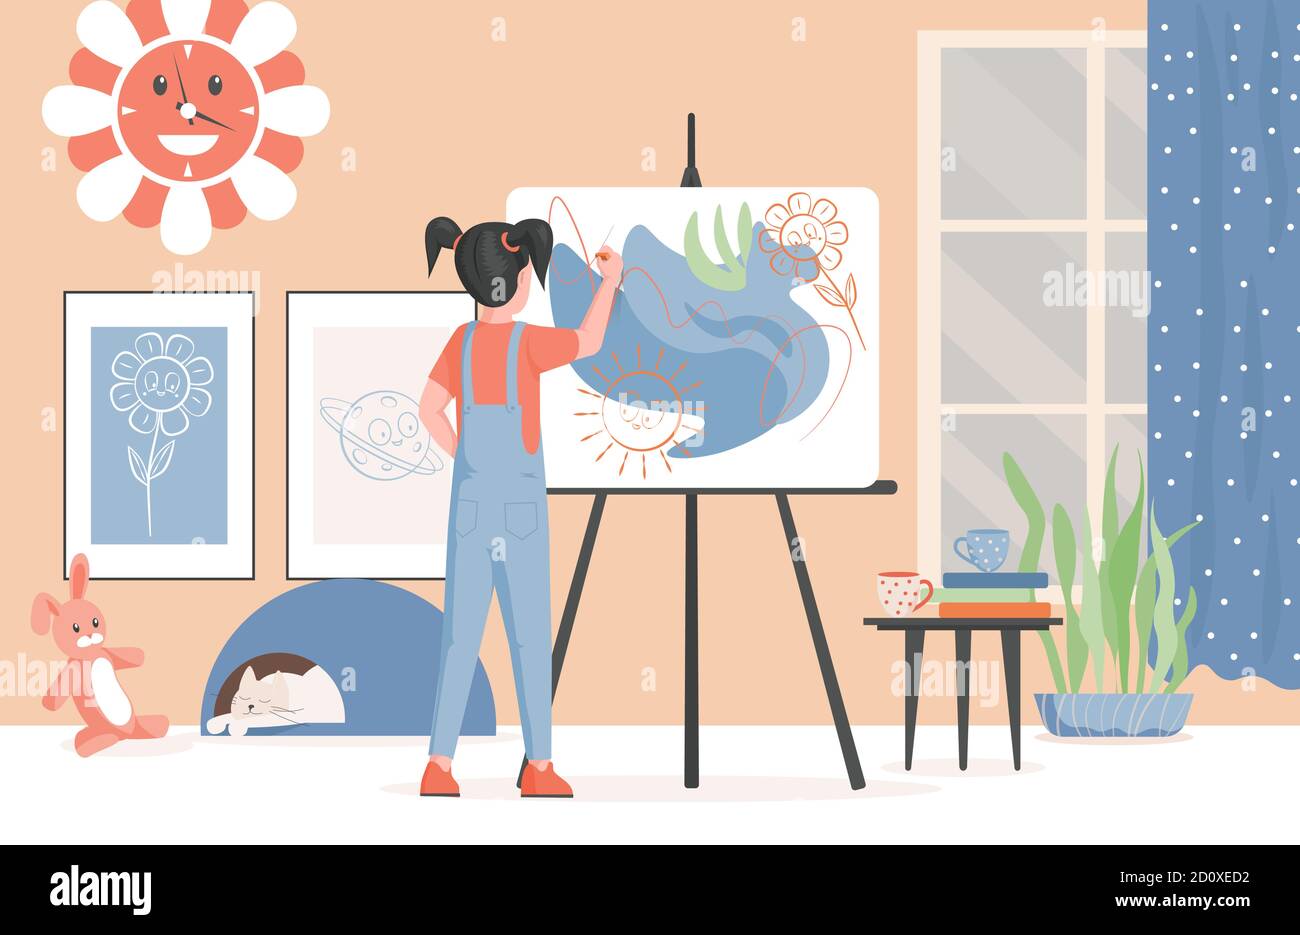 https://c8.alamy.com/comp/2D0XED2/cute-little-girl-in-modern-clothes-drawing-flowers-and-sun-on-paper-on-easel-vector-flat-illustration-children-room-interior-design-with-paintings-home-plants-and-domestic-pet-2D0XED2.jpg